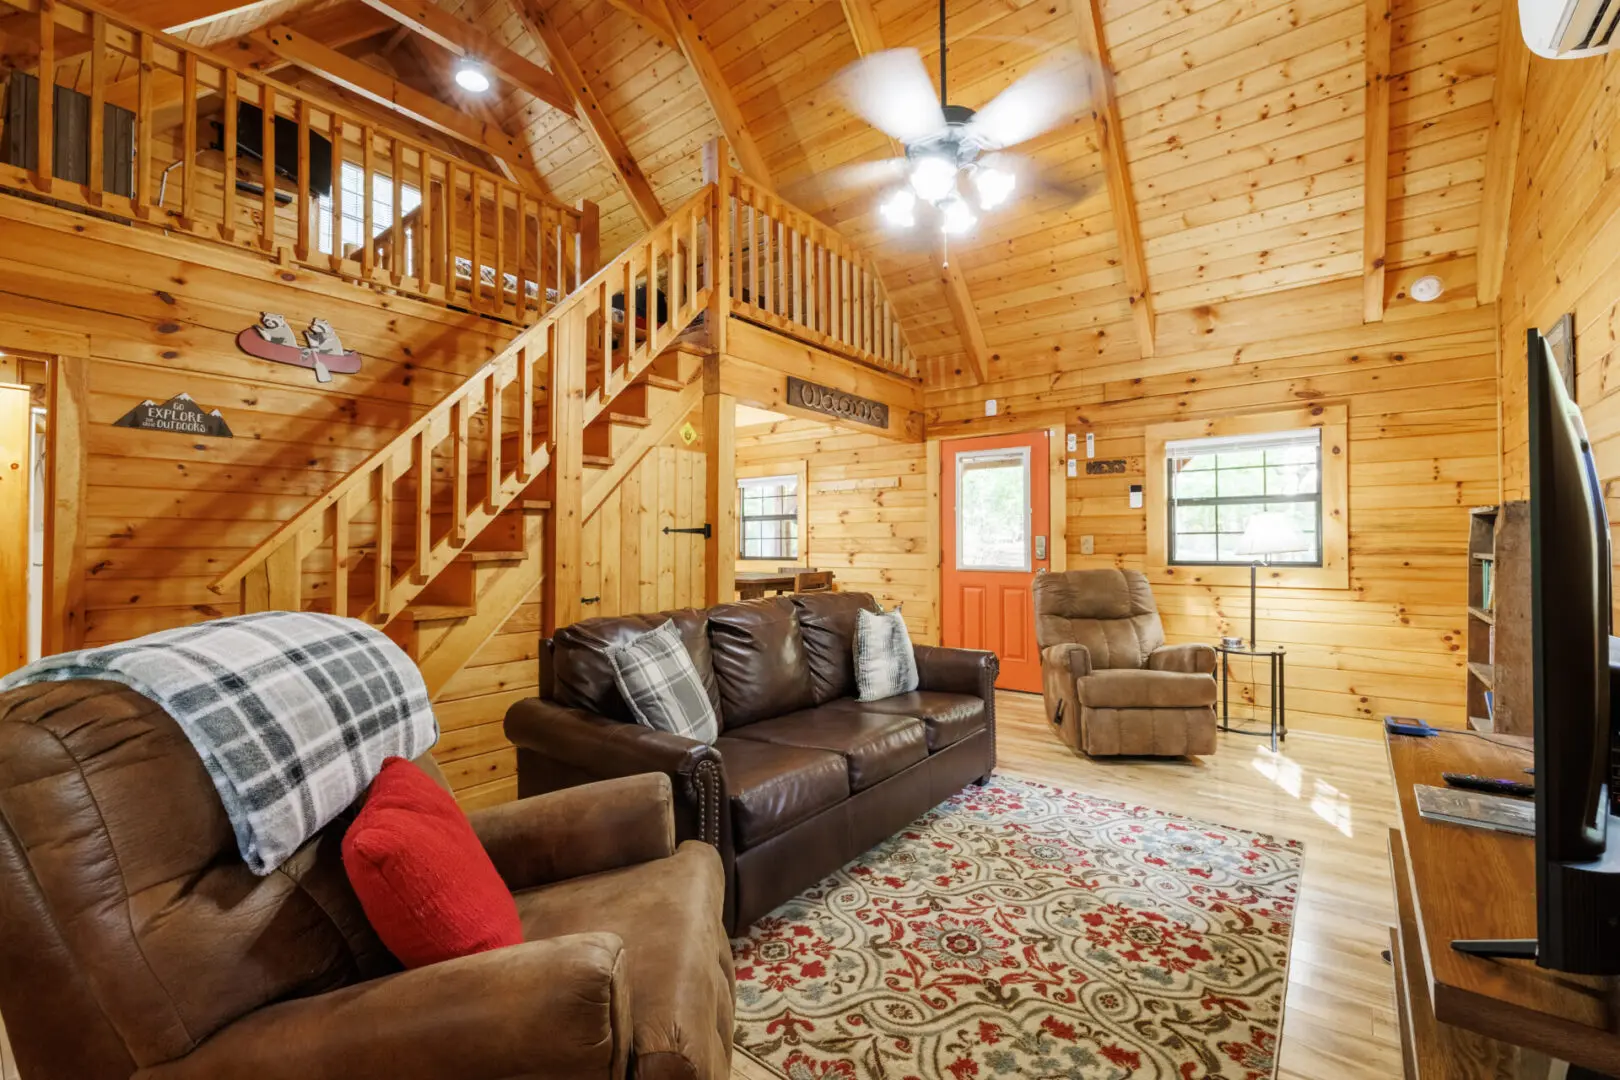 A living room in a log cabin.